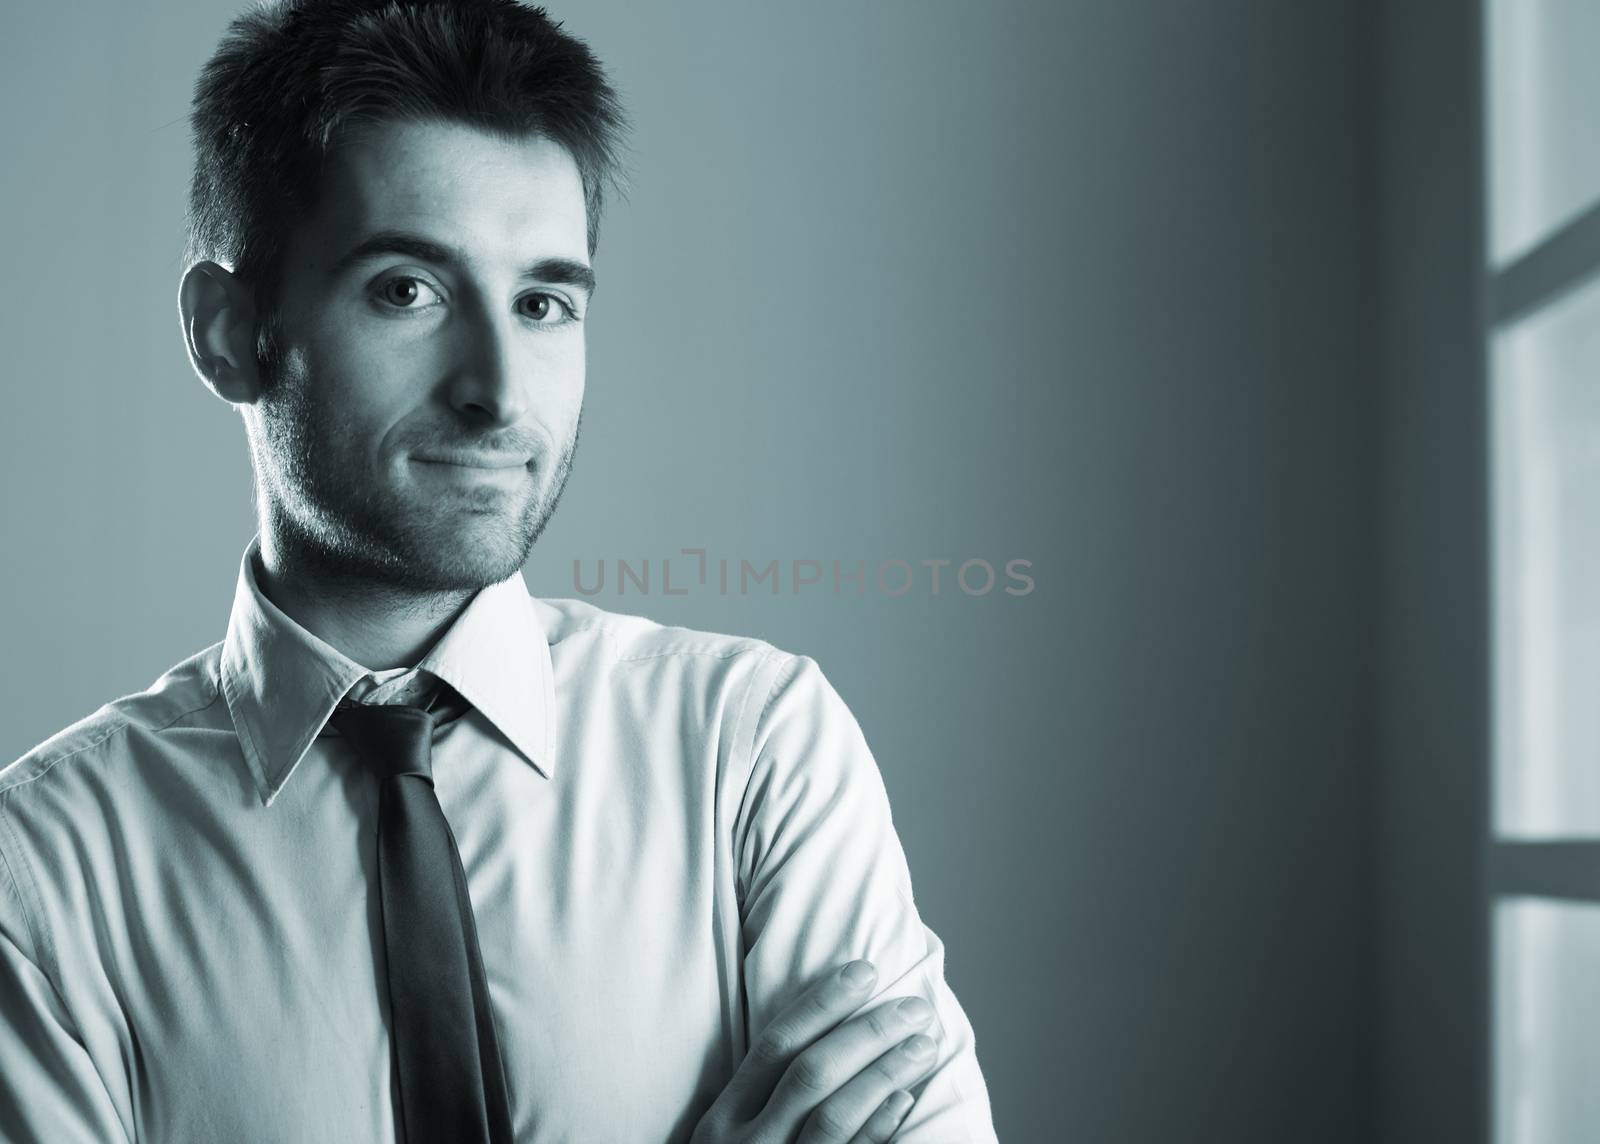 Attractive businessman posing by stokkete